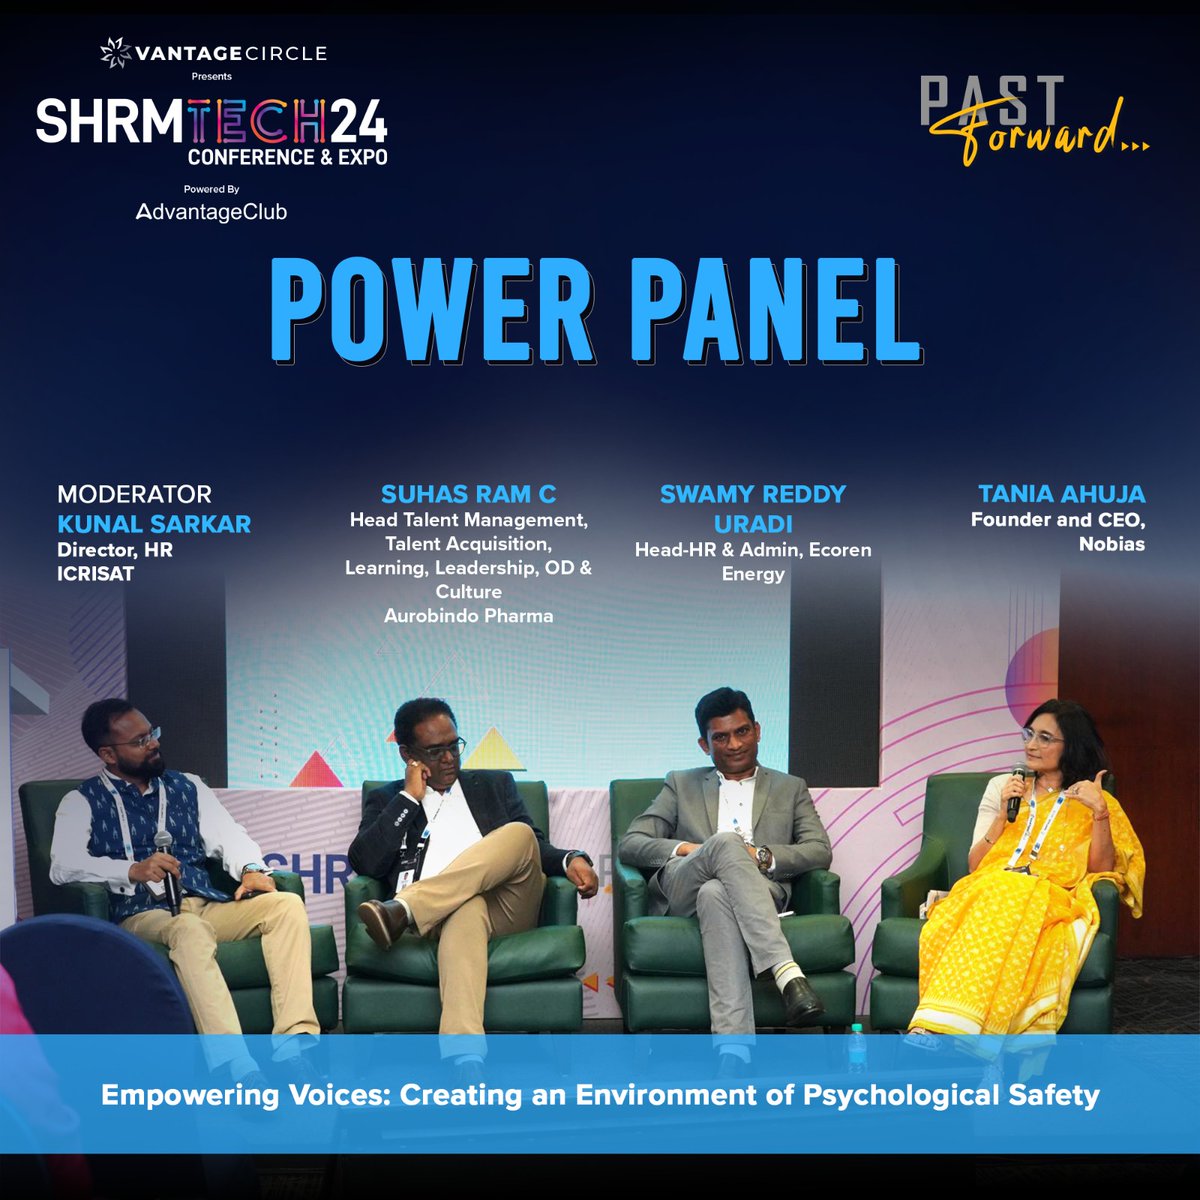 Strengthening Psychological Safety at #SHRMIndiaTech! In the enlightening session, 'Empowering Voices: Creating an Environment of Psychological Safety.' Led by Moderator Kunal Sarkar, Director of HR at ICRISAT, the panel, including Tania Ahuja, Founder and CEO of Nobias; Swamy